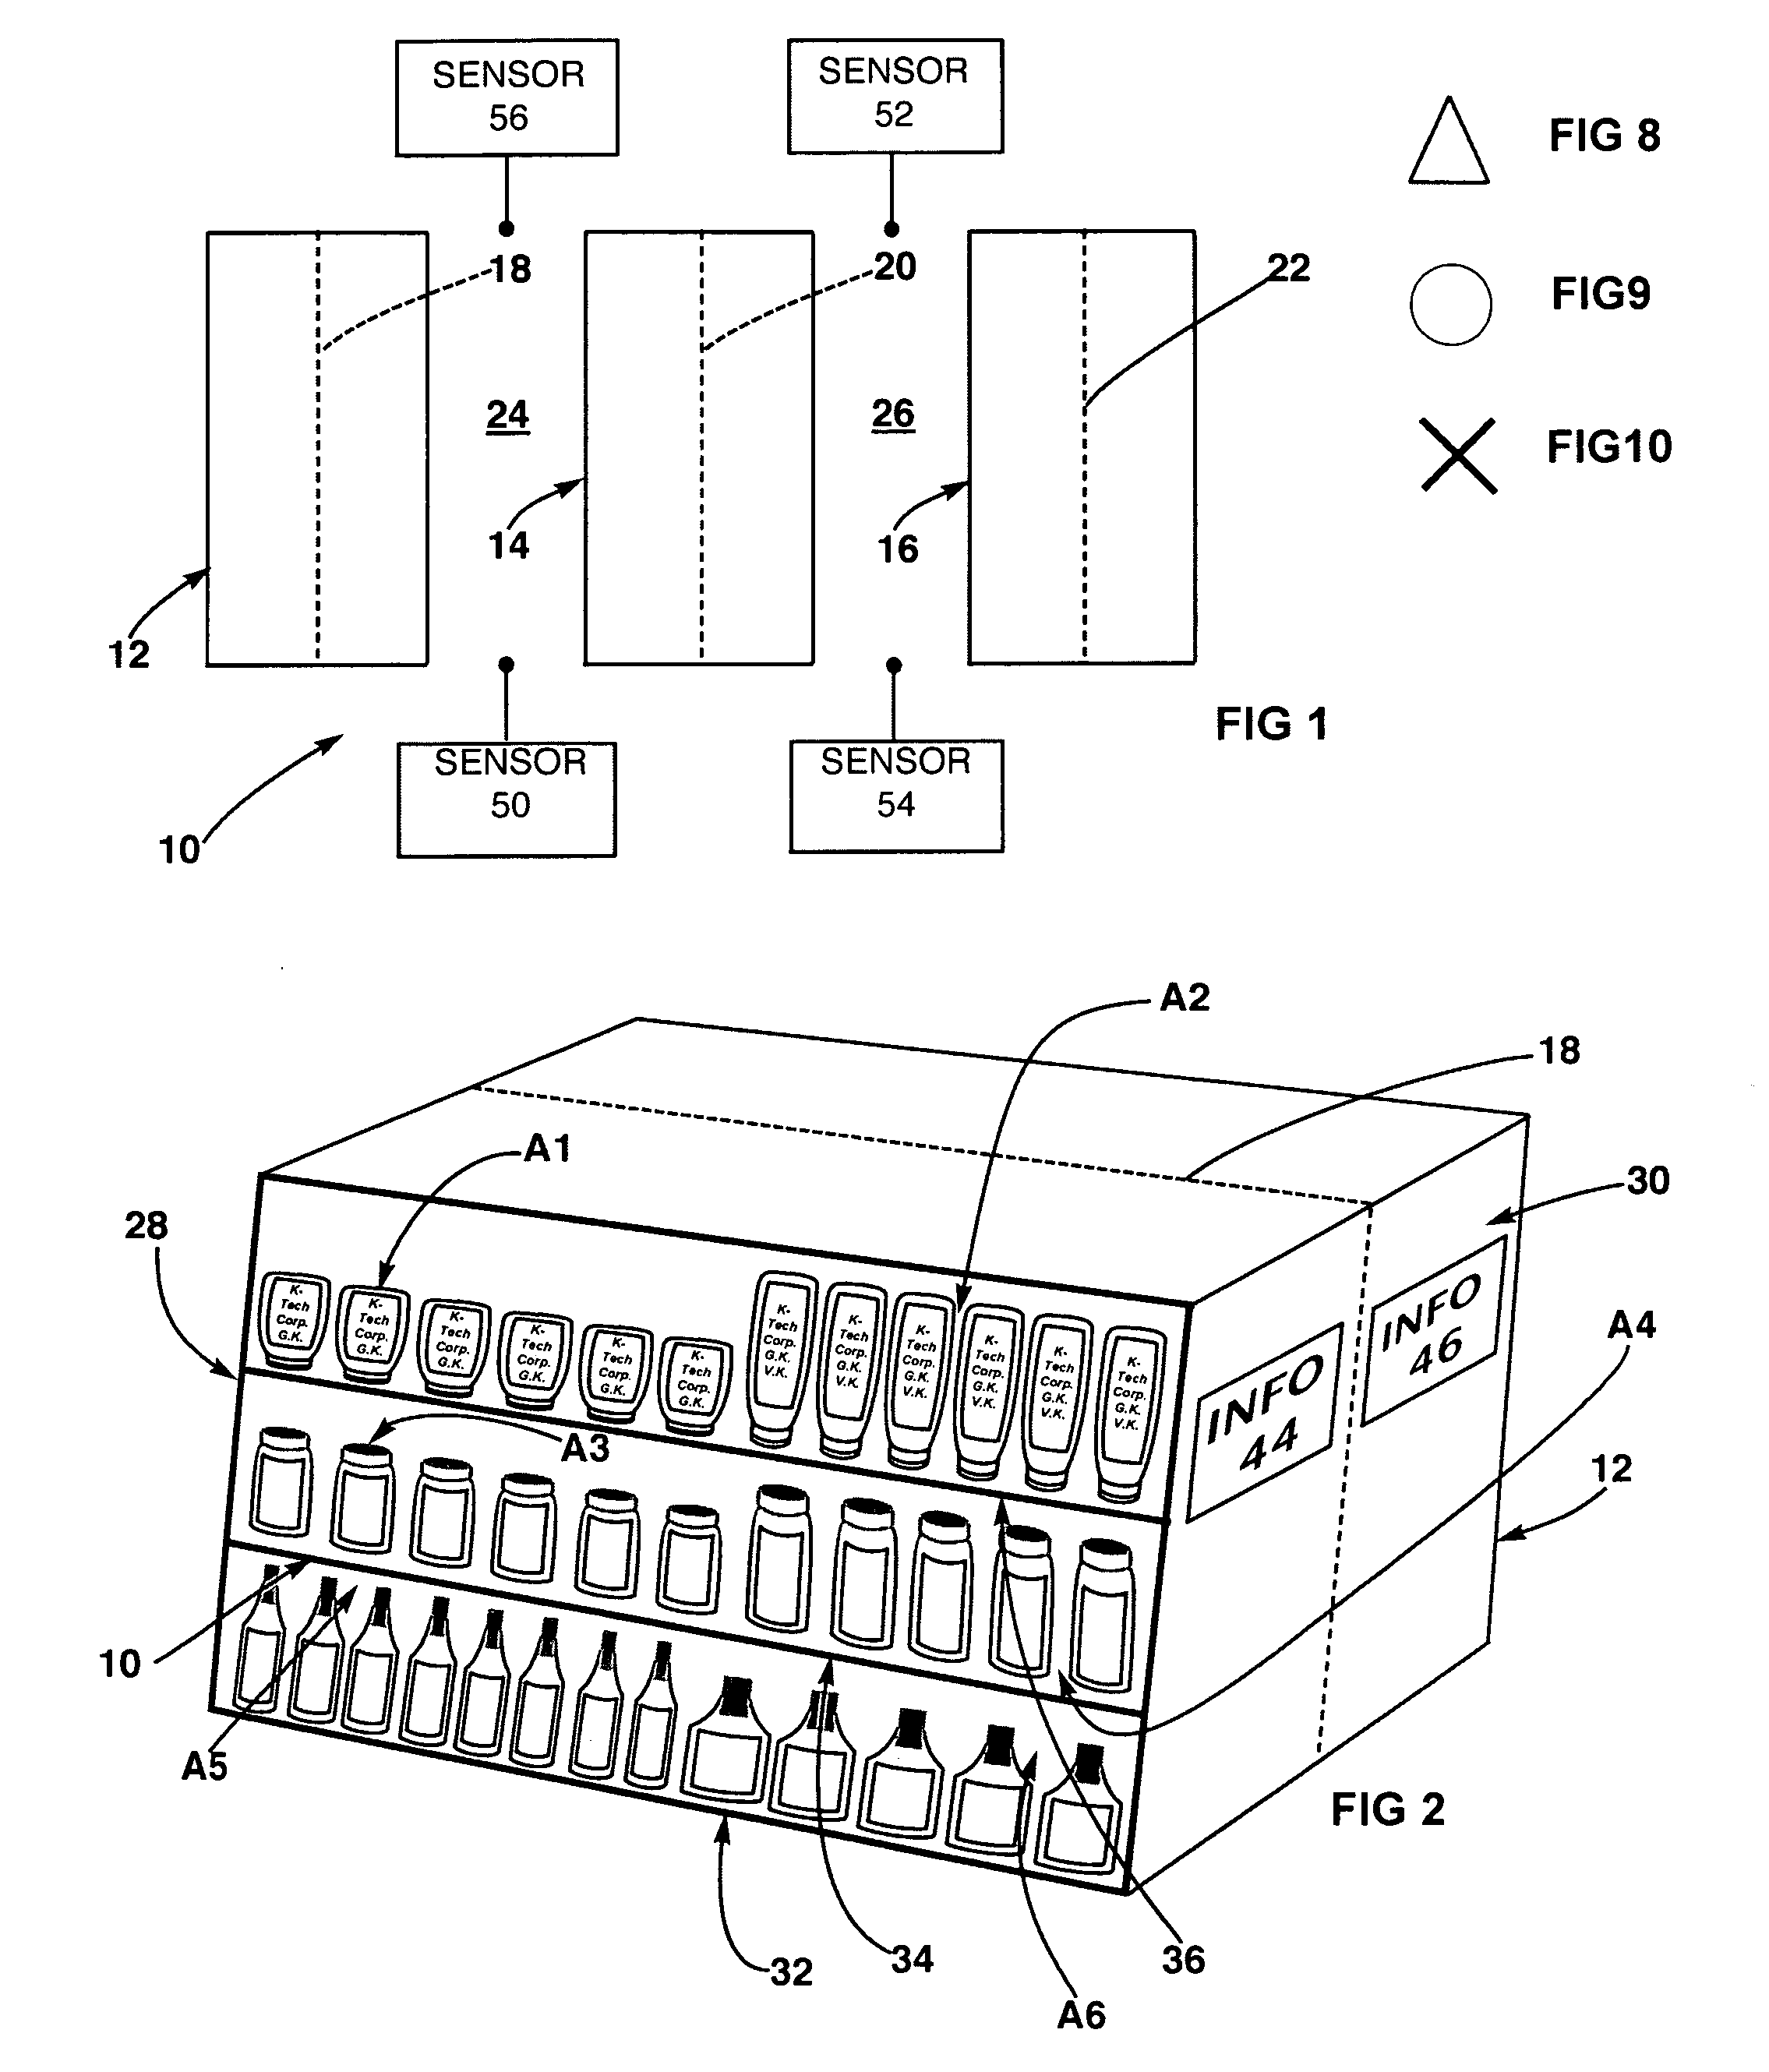 Product identification system for persons with limited vision